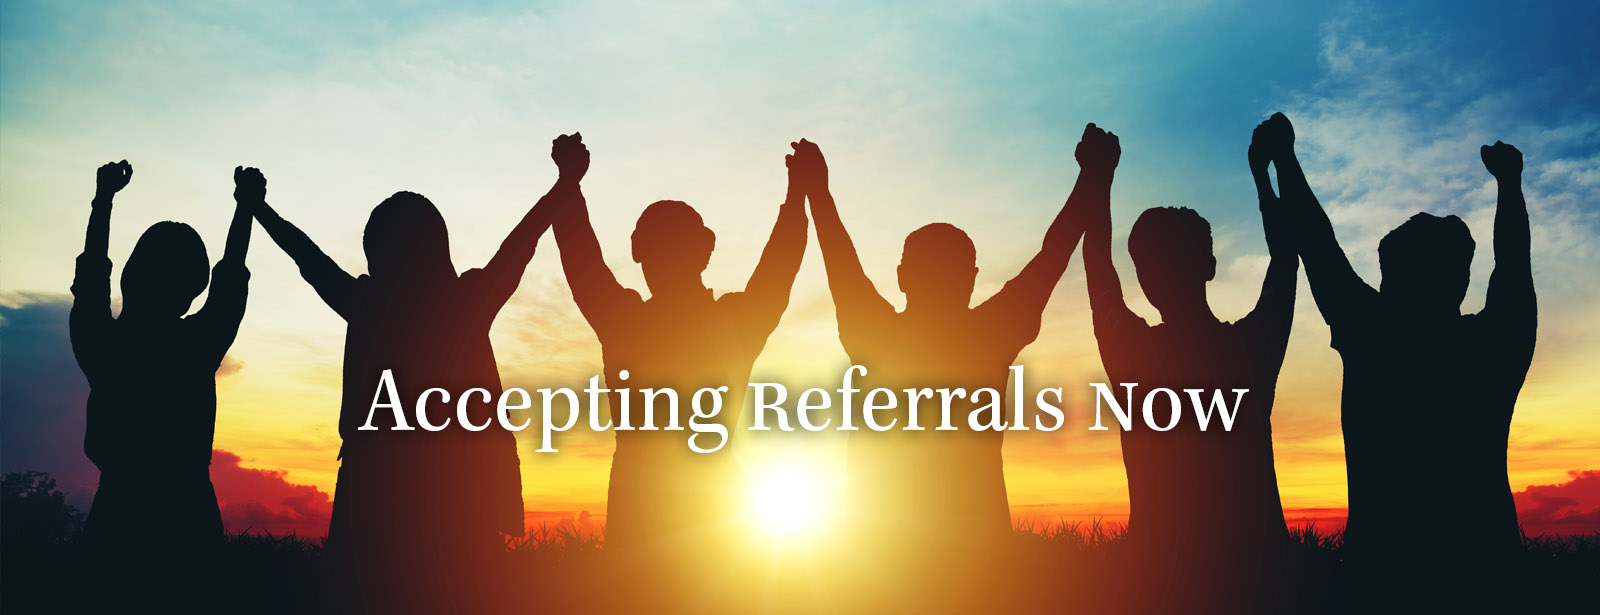 Diakon Your Services Accepting Referrals